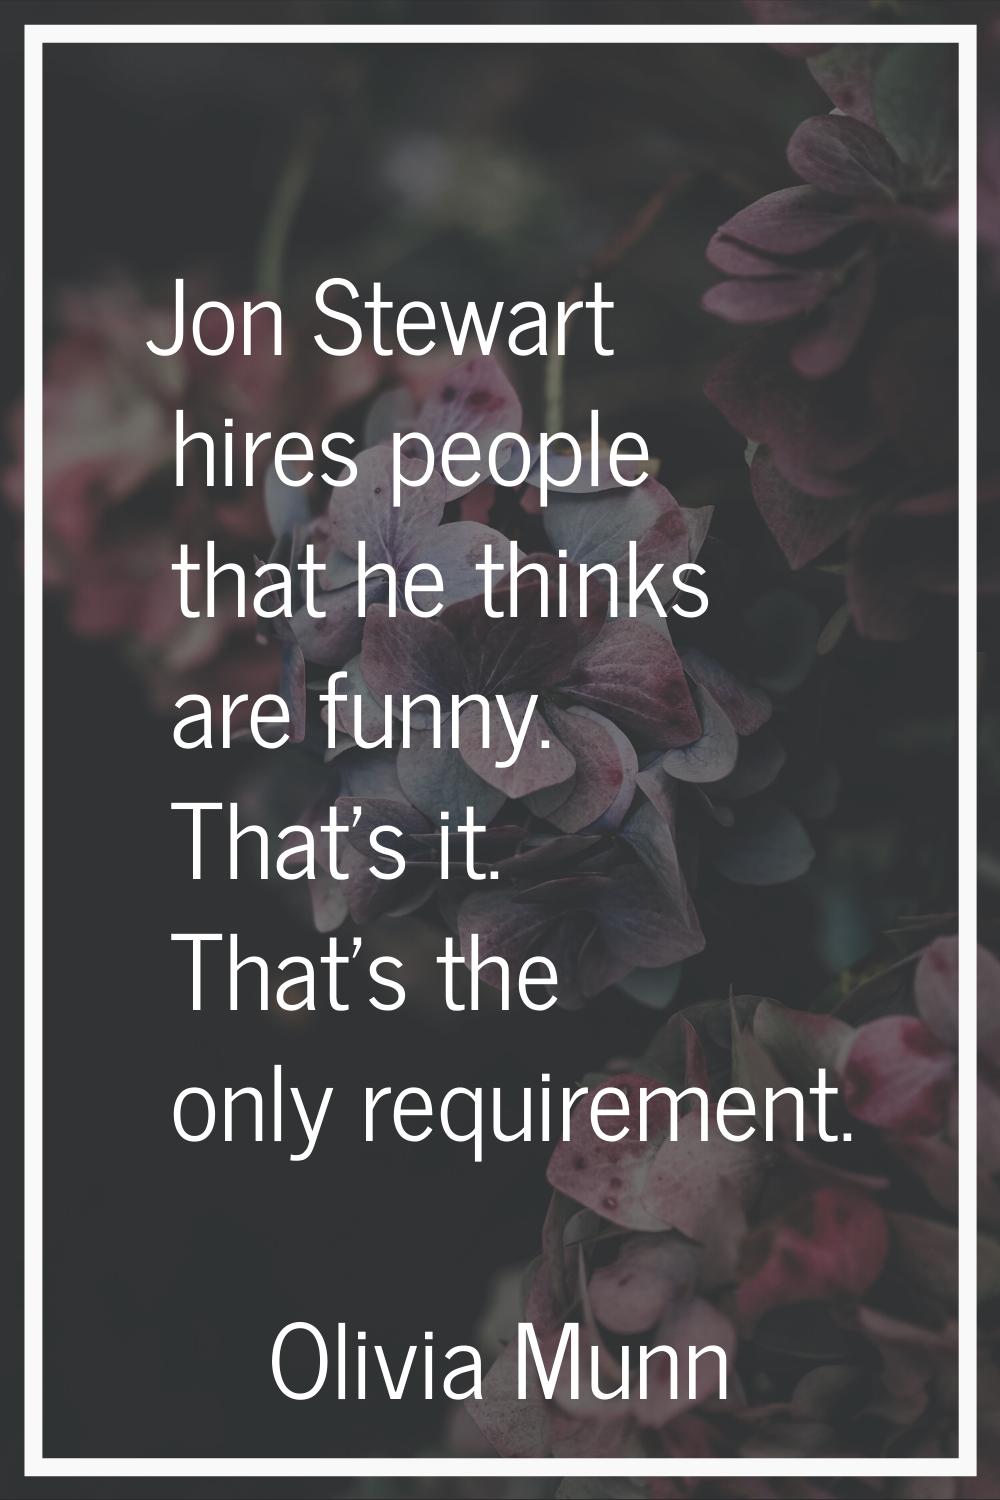 Jon Stewart hires people that he thinks are funny. That's it. That's the only requirement.